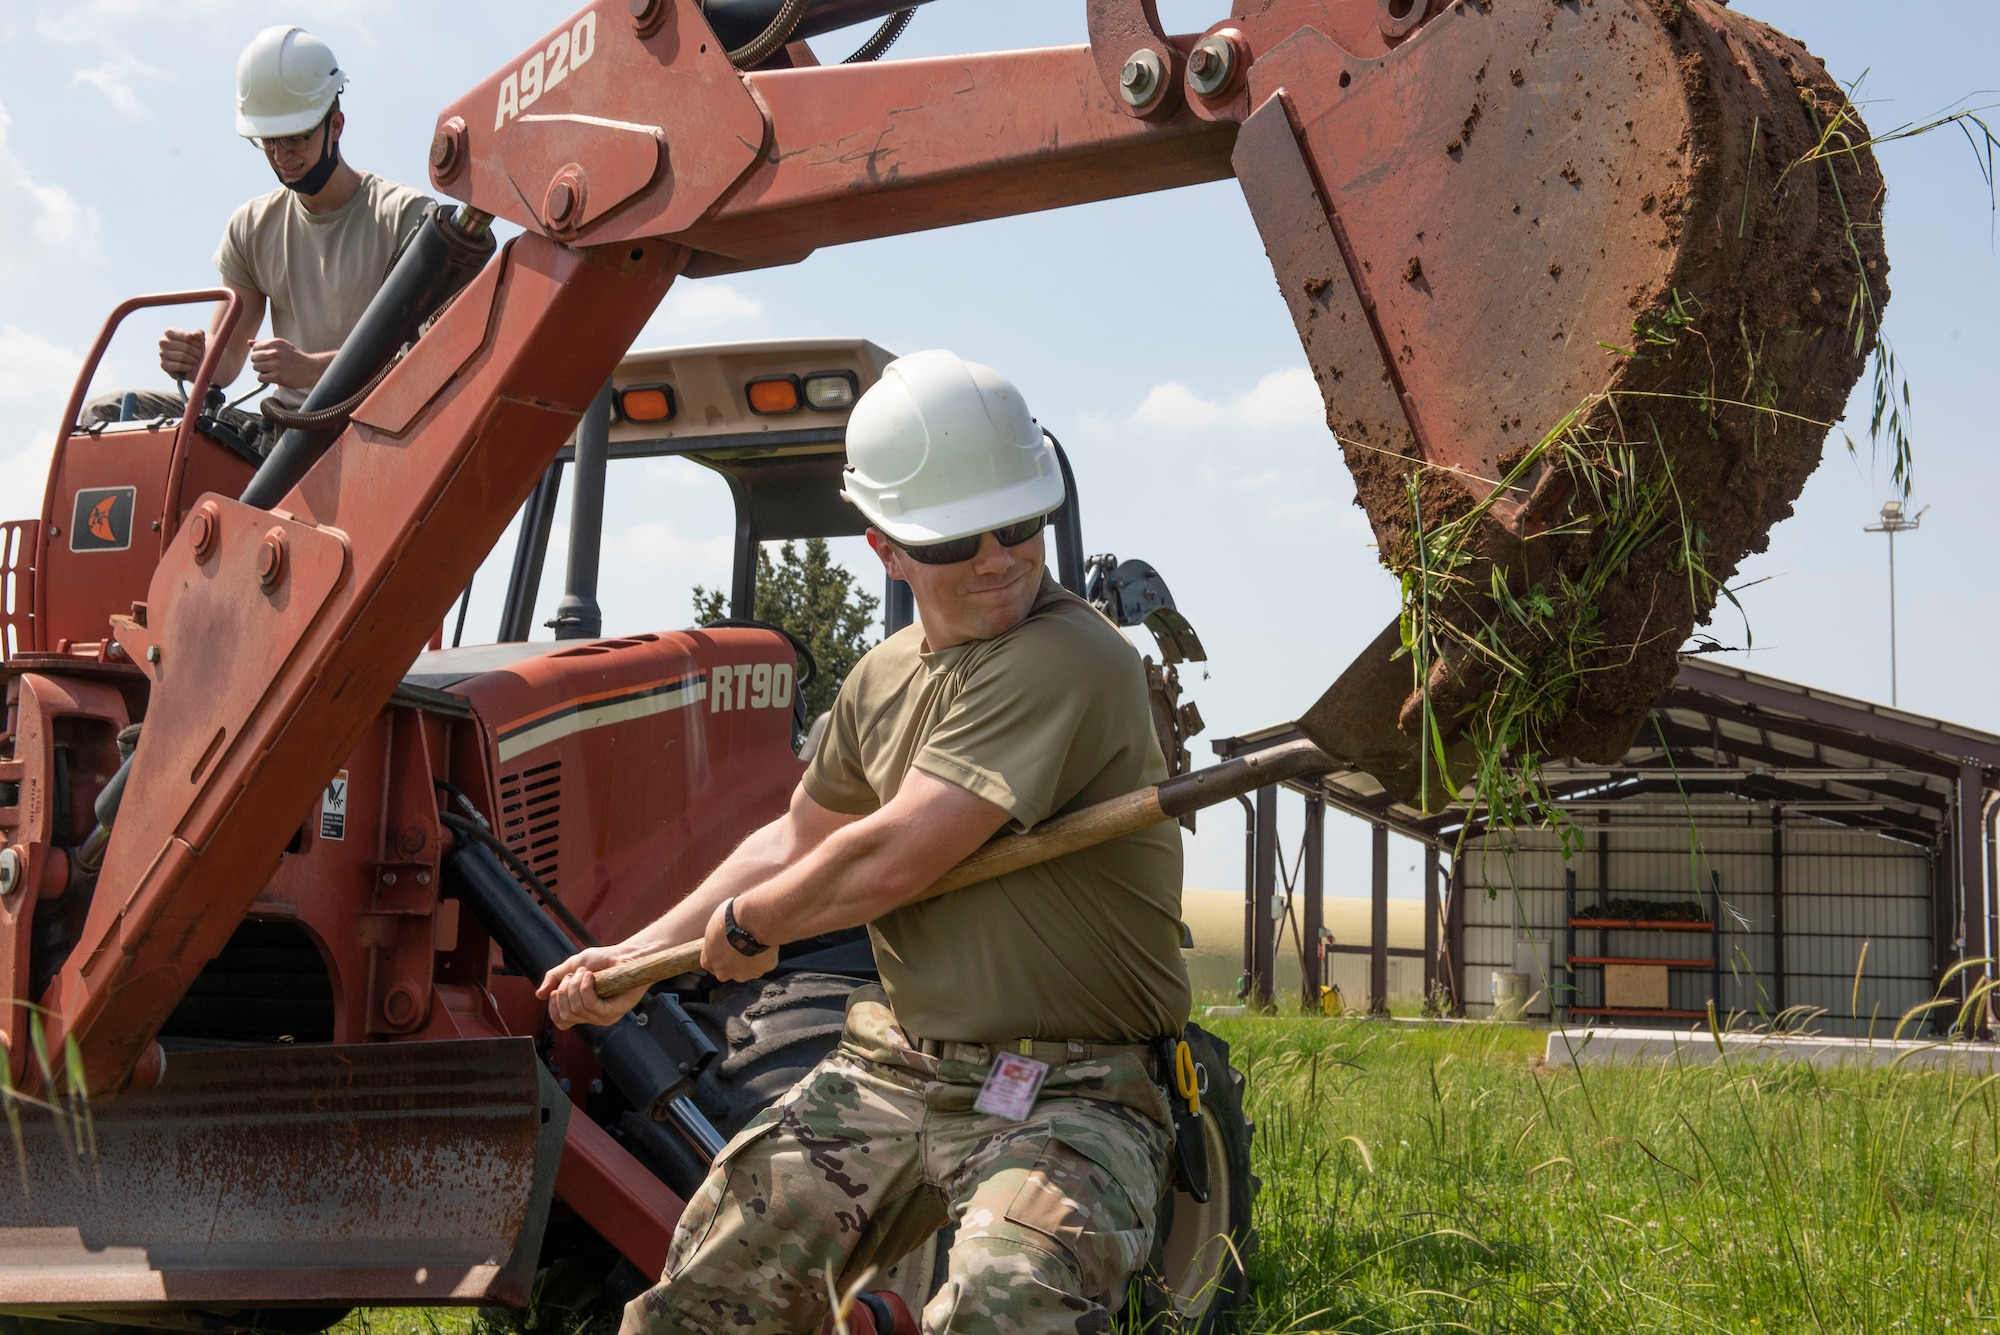 U.S. Air Force Tech. Sgt. Jonathan Allen, 39th Communications Squadron non-commissioned officer in charge of cable and antenna systems, uses a shovel to dislodge dirt from a trenching machine May 11, 2020, at Incirlik Air Base, Turkey. Cable and antenna systems Airmen, commonly called “cable dawgs,” are unique from their other colleagues in communications because their job primarily takes place outdoors. (U.S. Air Force photo by Staff Sgt. Joshua Magbanua)